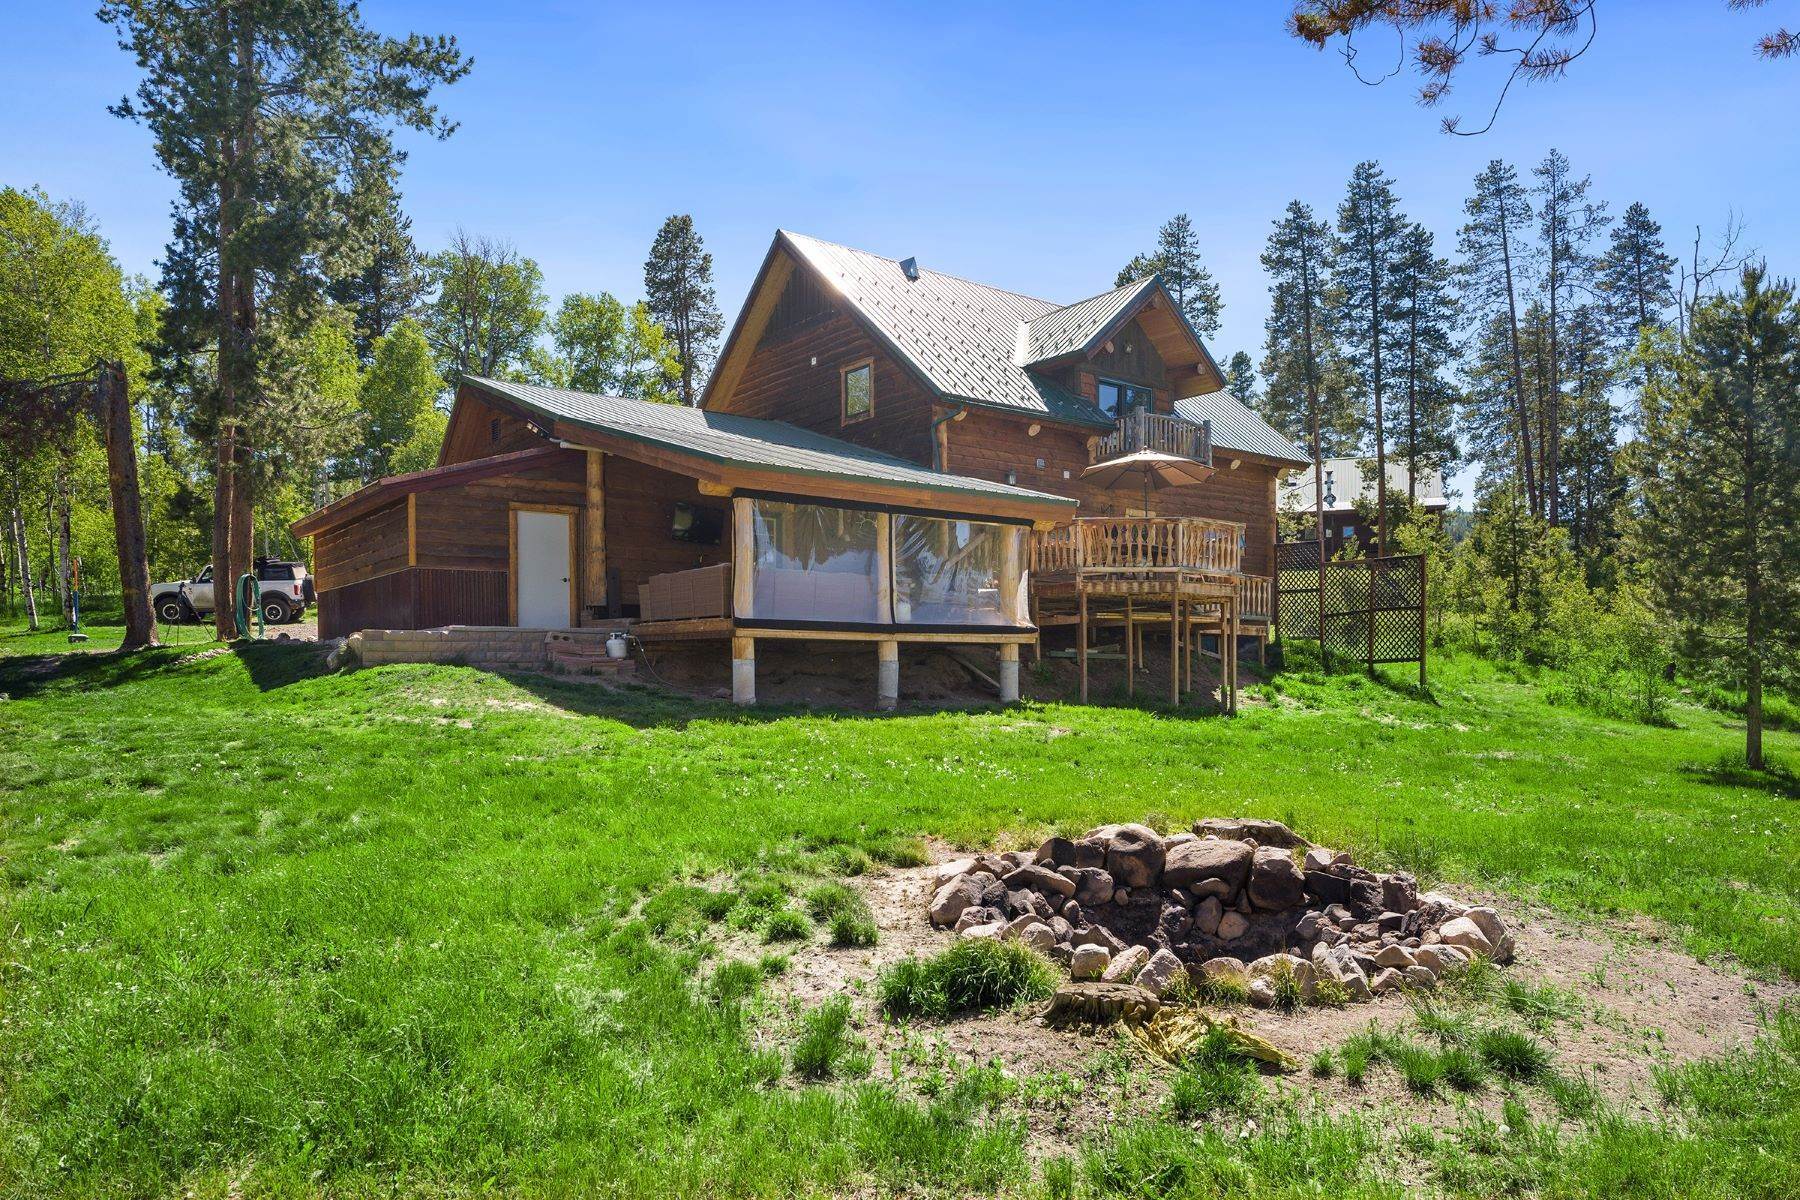 Property for Sale at The Ultimate Mountain Home 32451 Ute Trail Oak Creek, Colorado 80467 United States